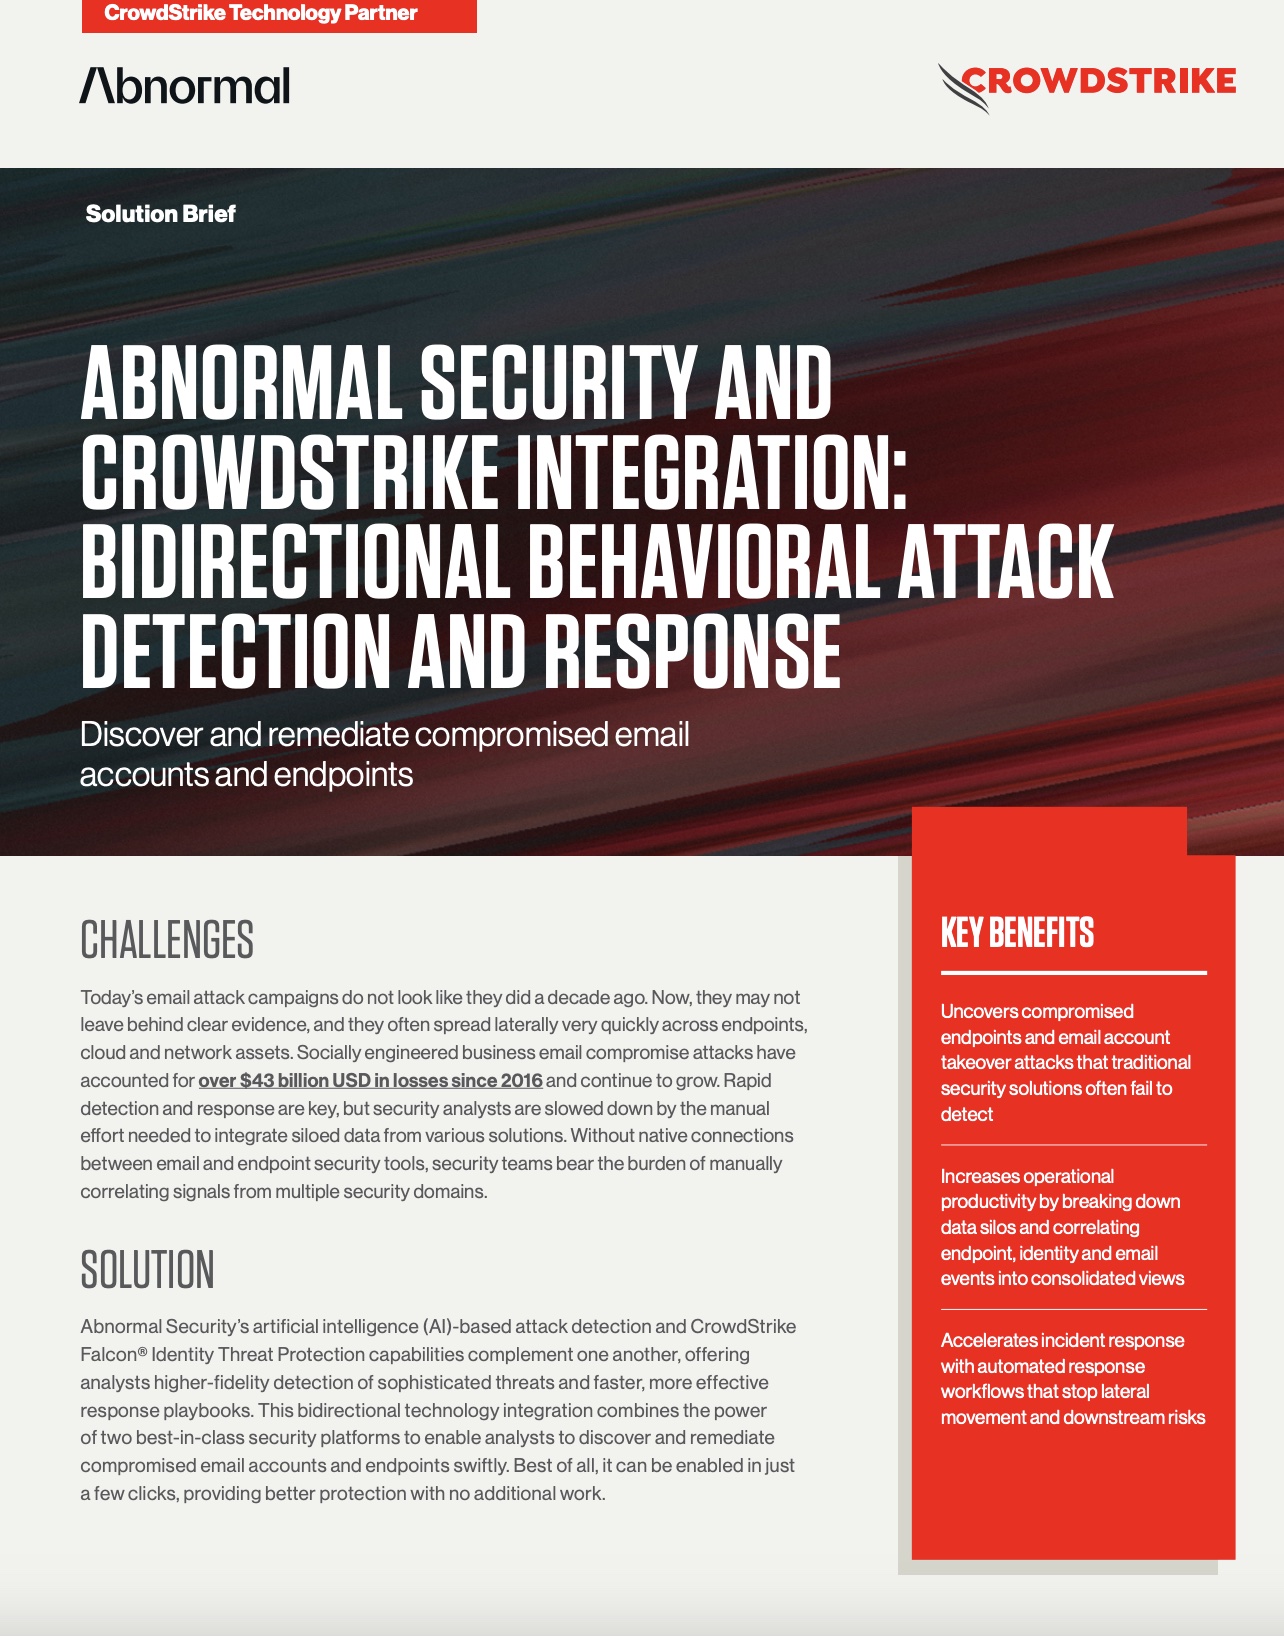 CrowdStrike and Abnormal Security Discovers and Remediates Compromised Email Accounts and Endpoints